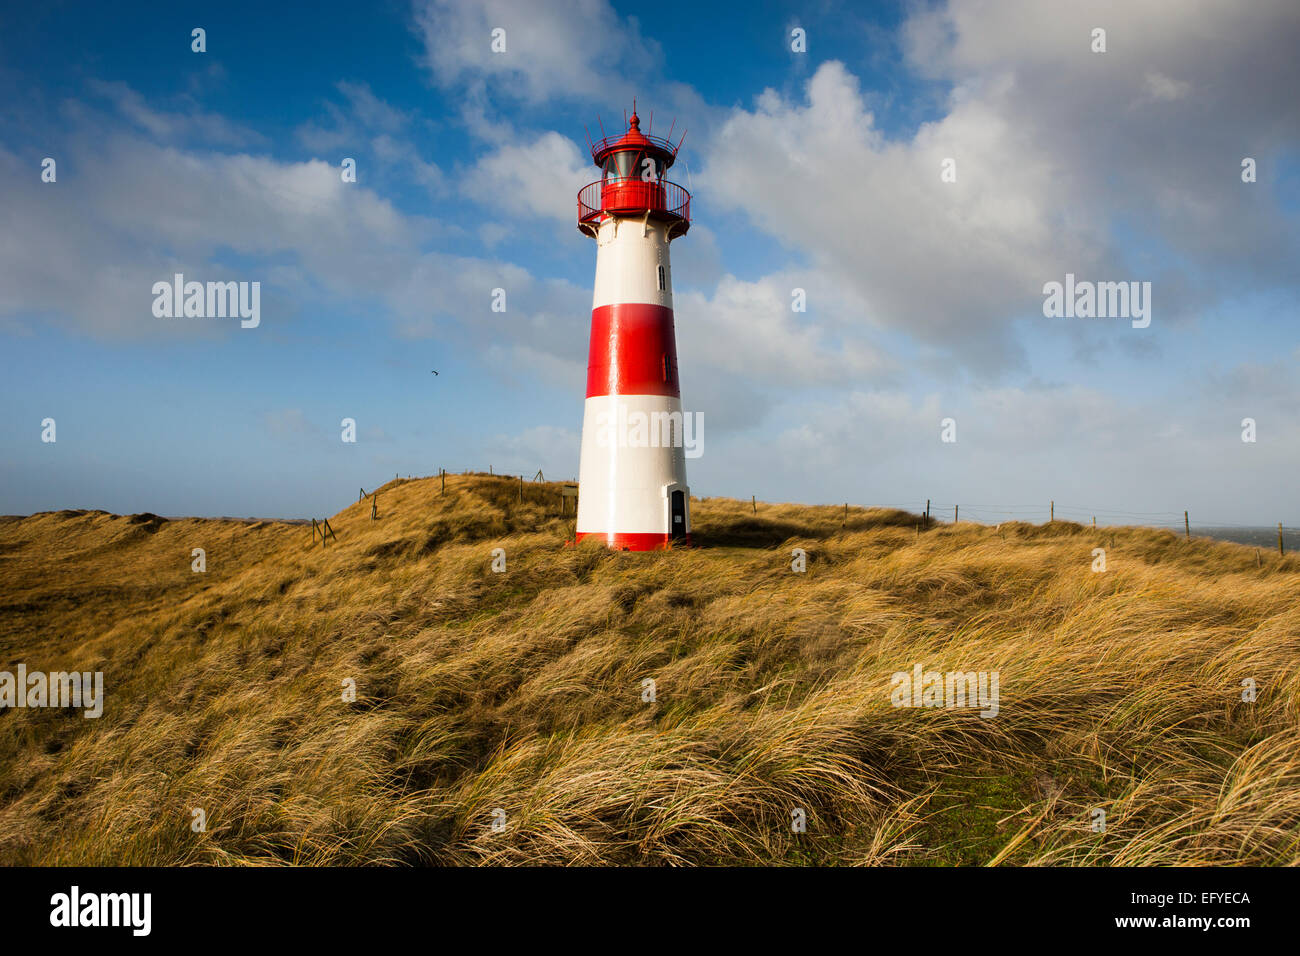 The red and white lighthouse of List Ost on the Ellenbogen peninsula, List, Sylt, North Frisia, Schleswig-Holstein, Germany Stock Photo